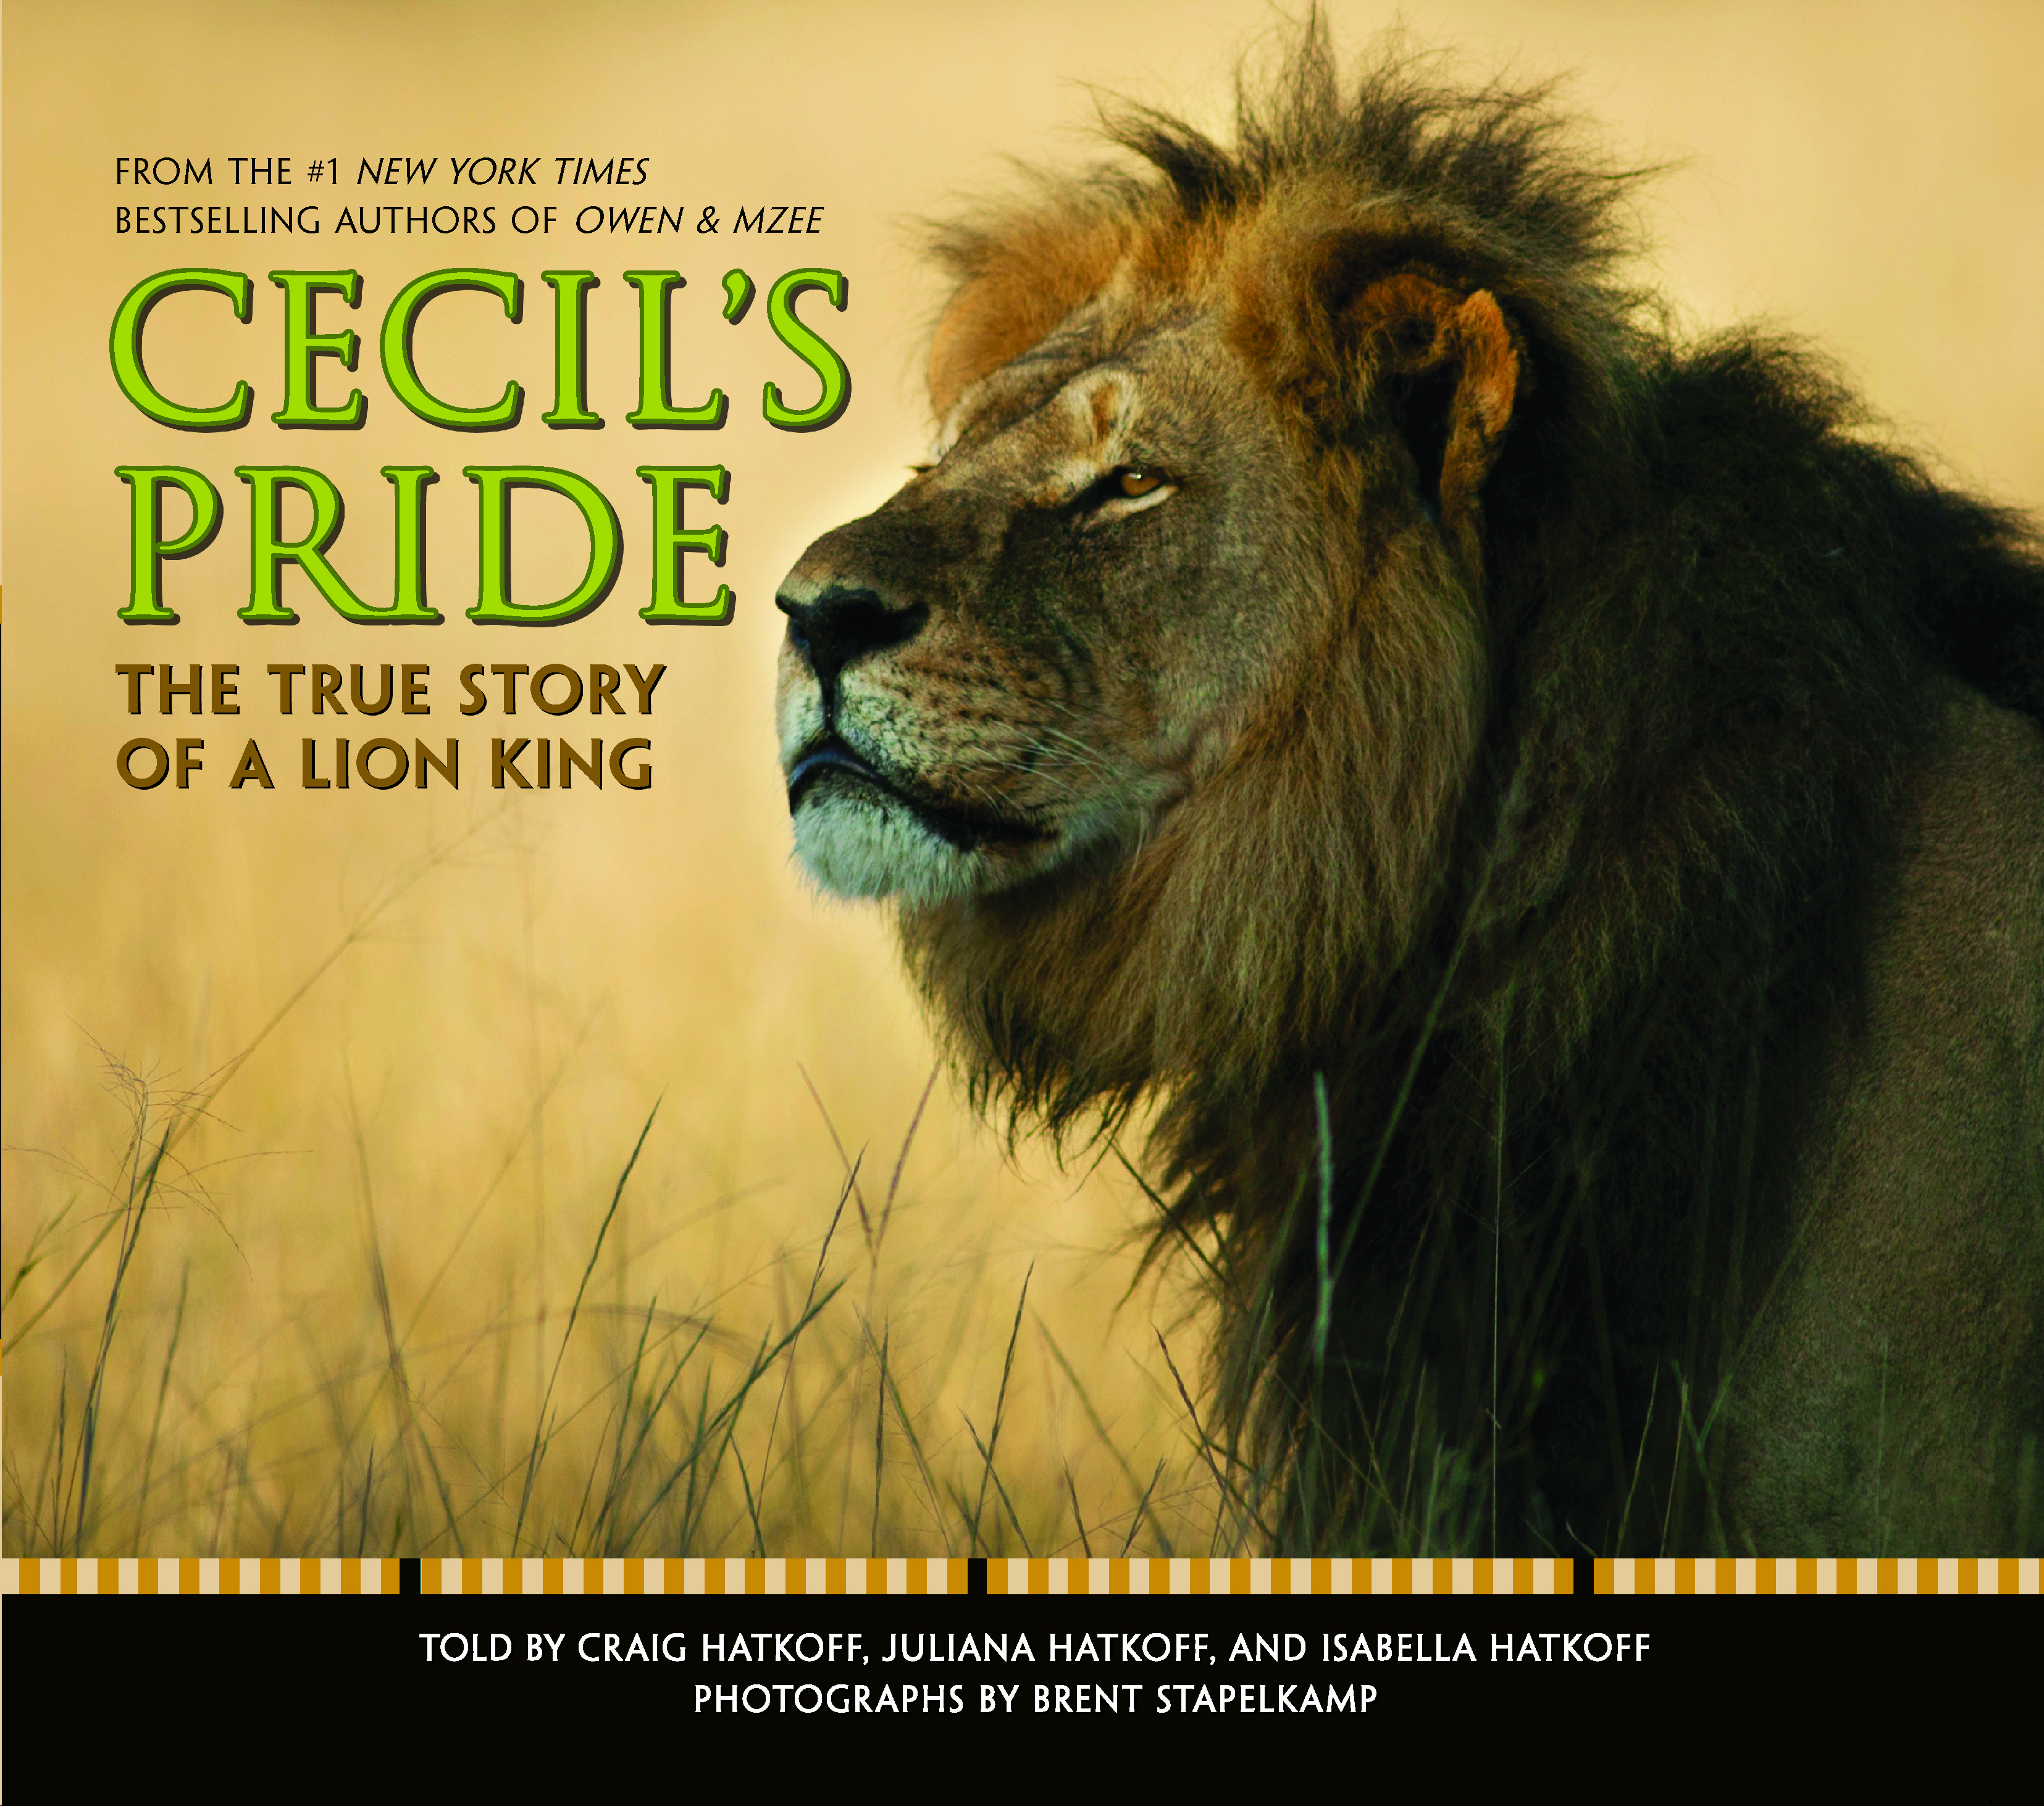 Exclusive first look at new book and never-before-seen photos of Cecil ...